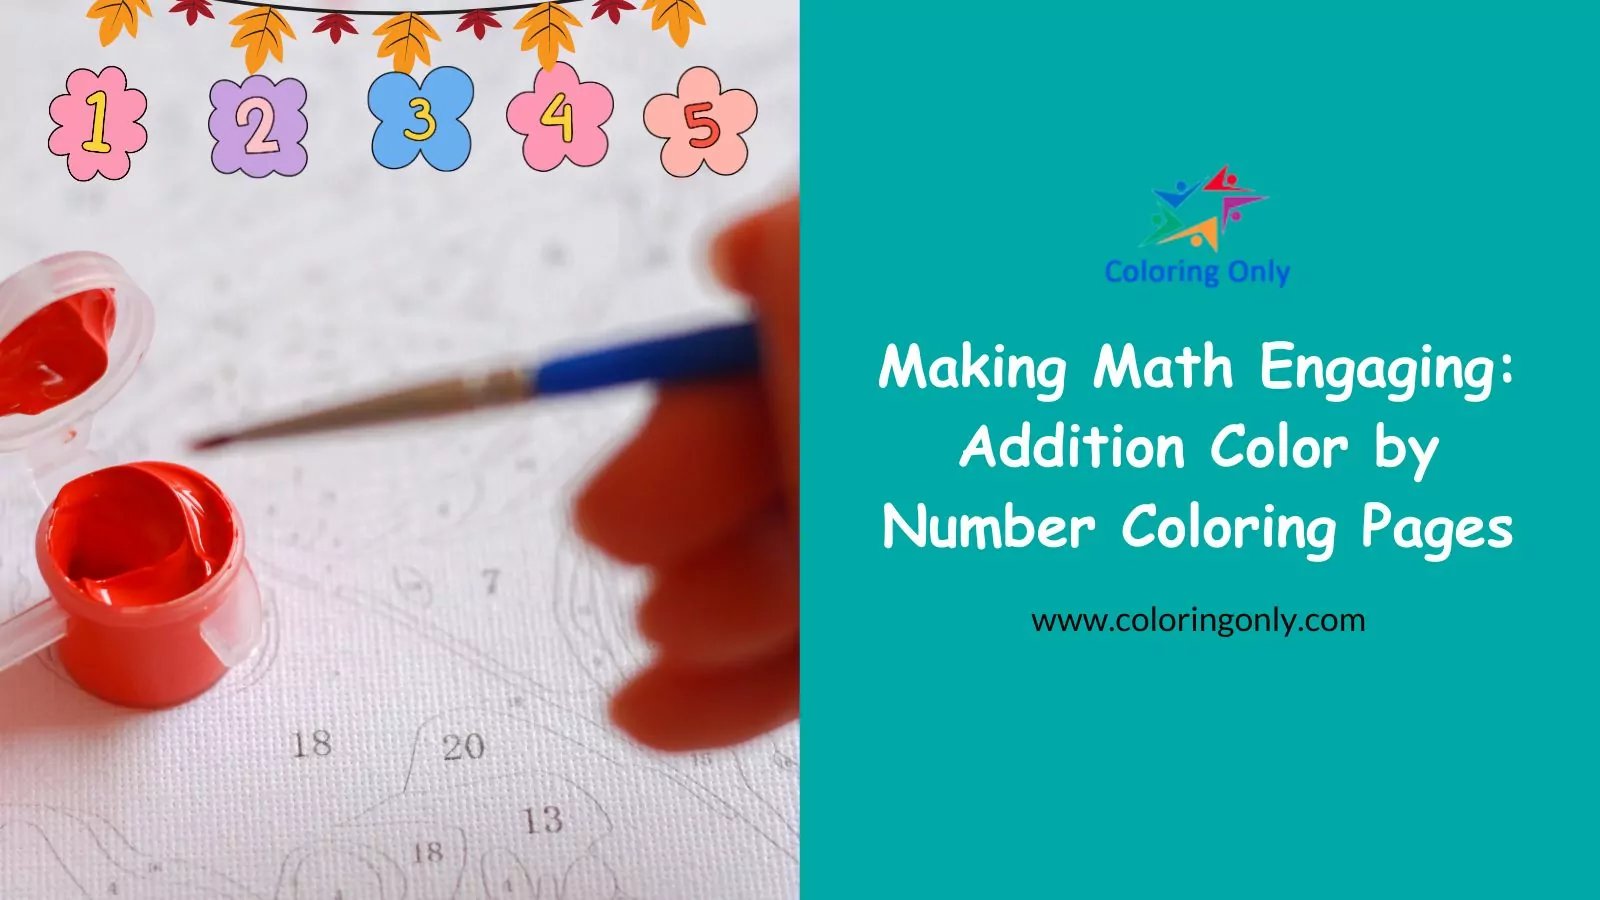 Making Math Engaging: Addition Color by Number Coloring Pages